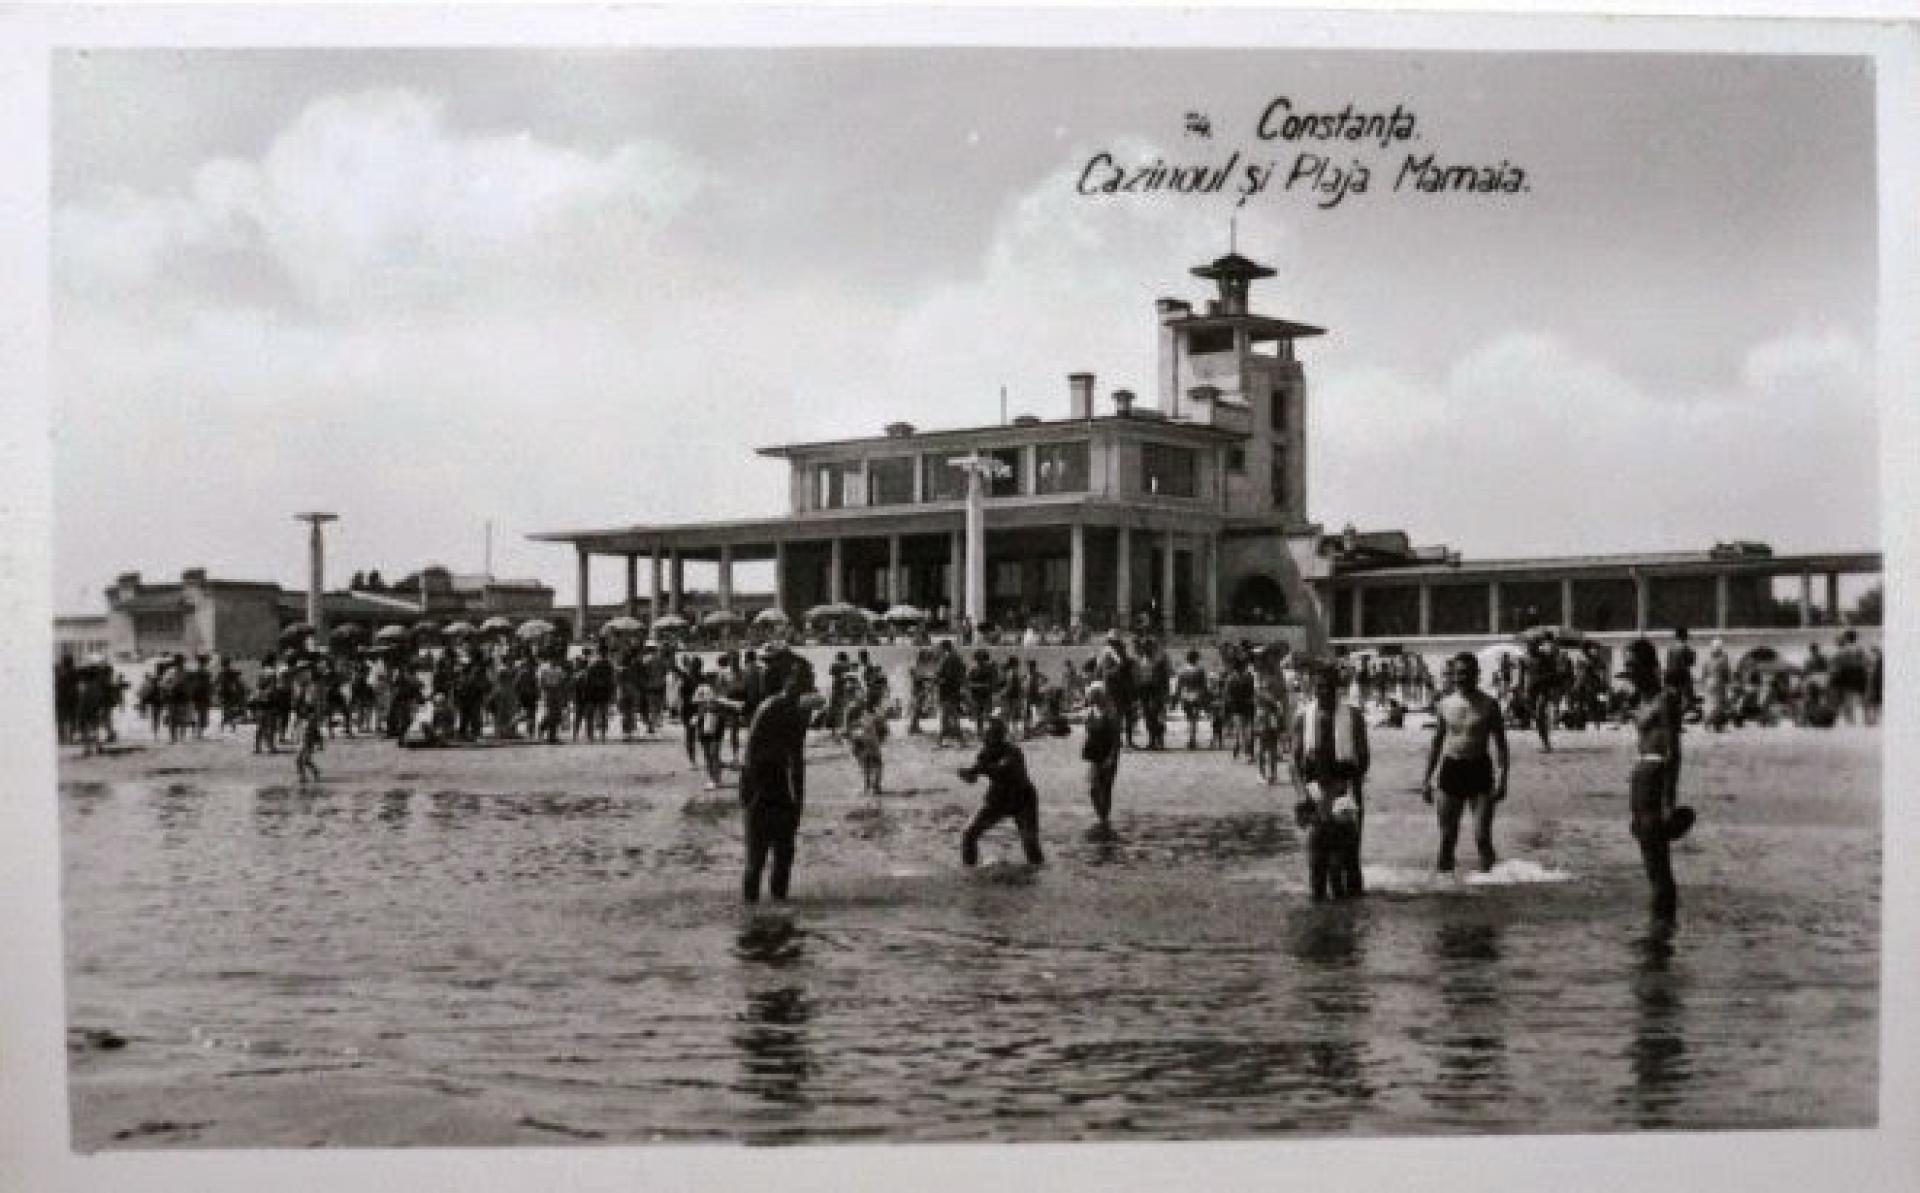 A crowded day at the beach in the late 1930s. | Postcard via radiovacanta.ro